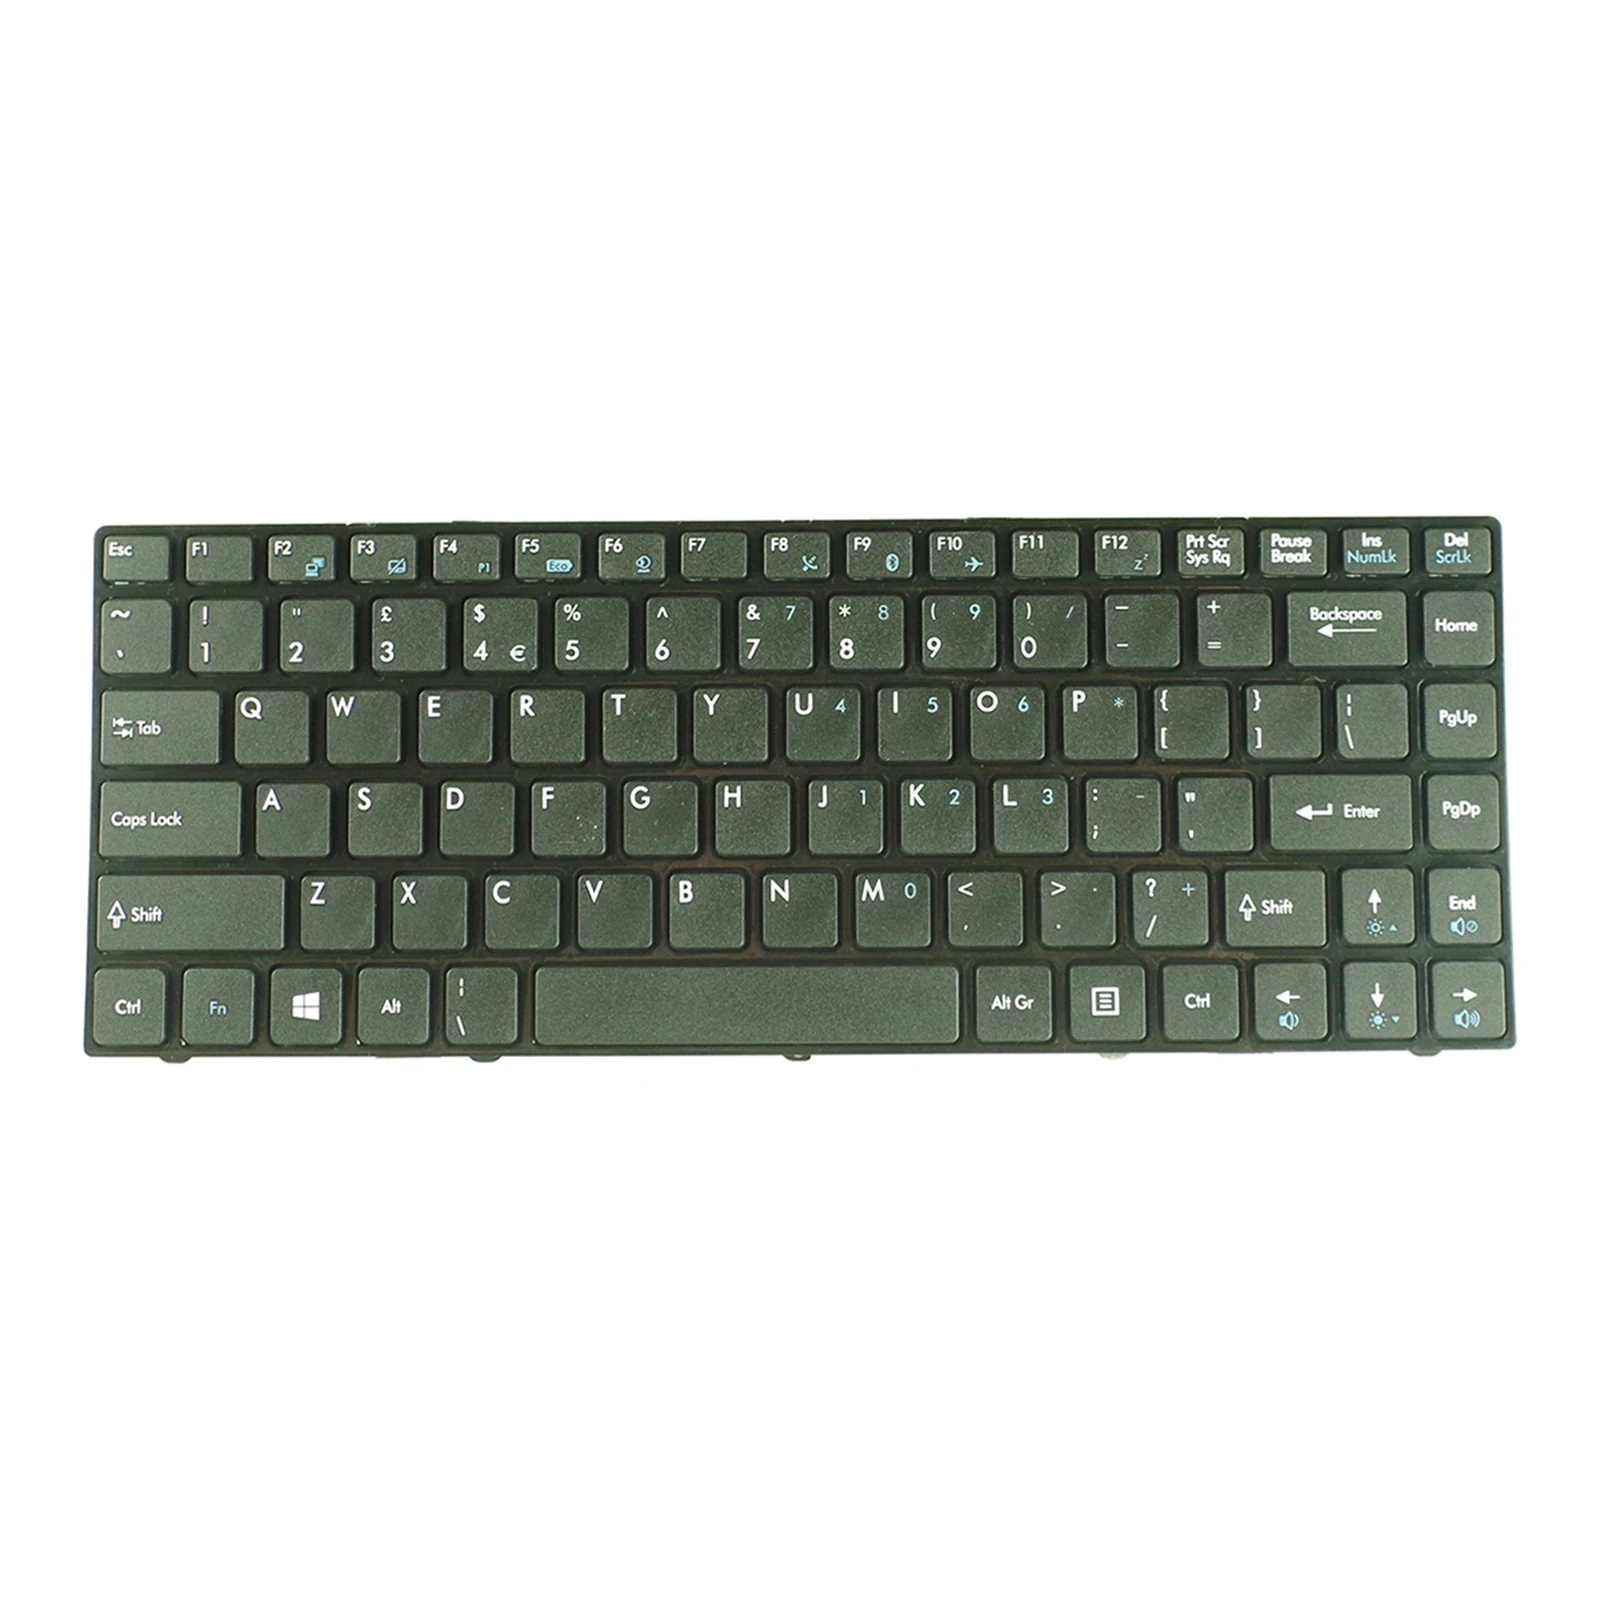 Replacement US English Keyboard for MSI CR420 CR430 CR460 X370 CX420 X420, Color : Black , Without Frame, Layout: US